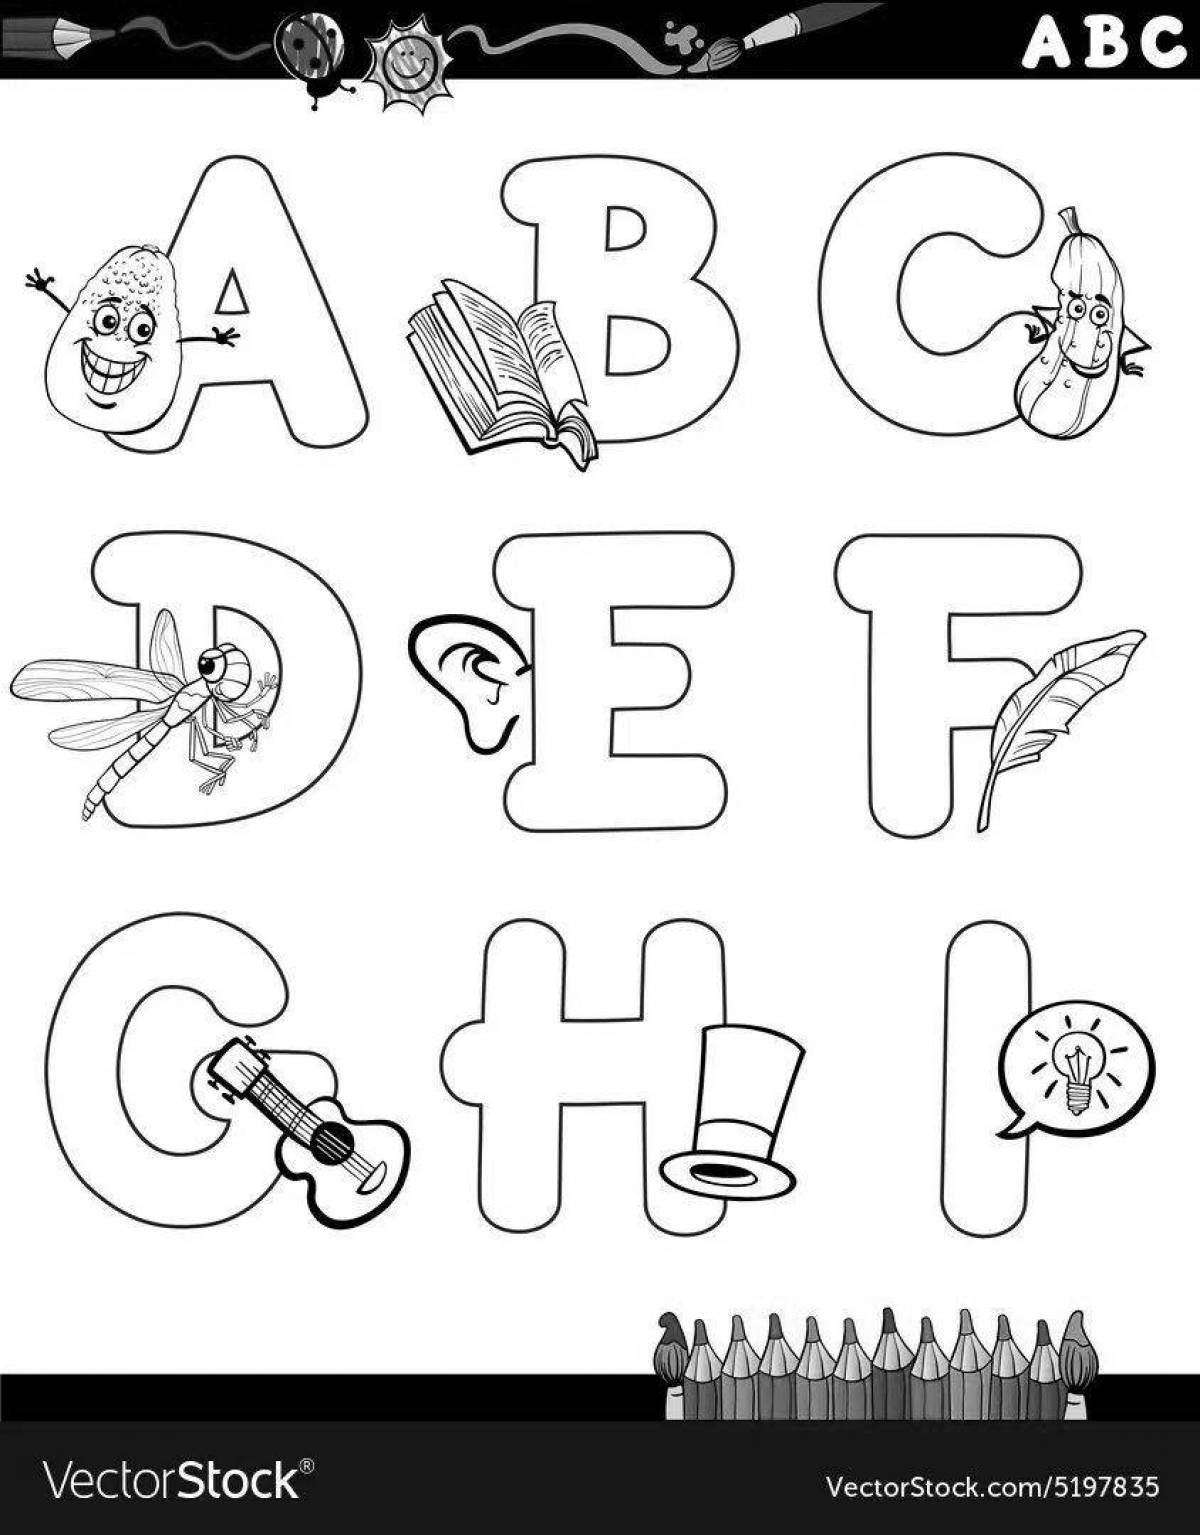 Colorful-bright alphabet knowledge coloring page